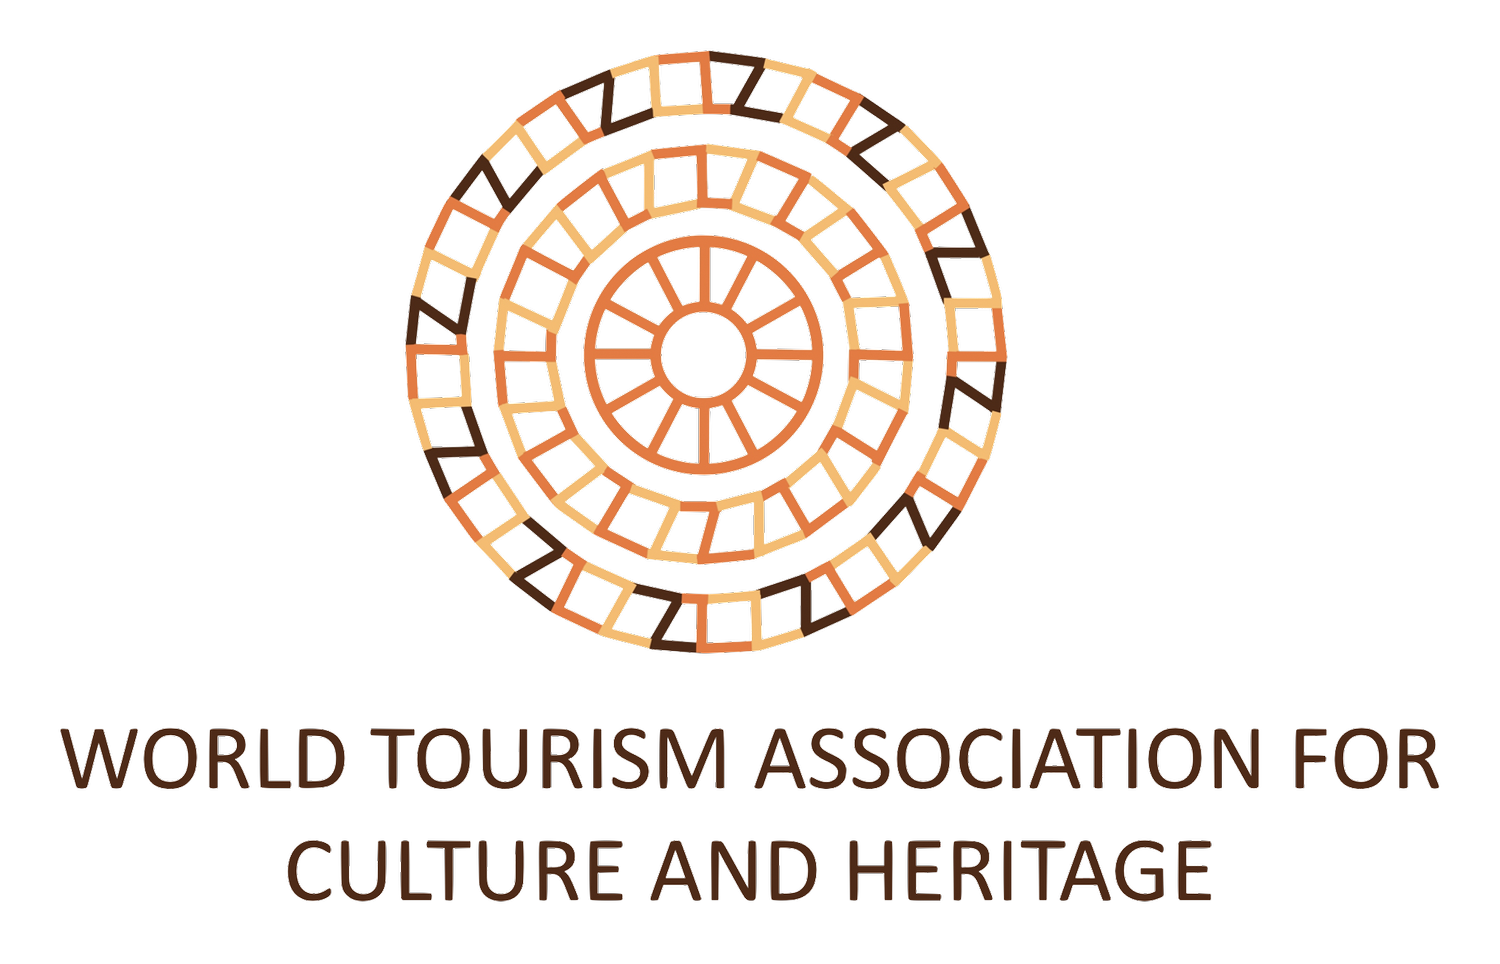 The World Tourism Association for Culture and Heritage (WTACH)